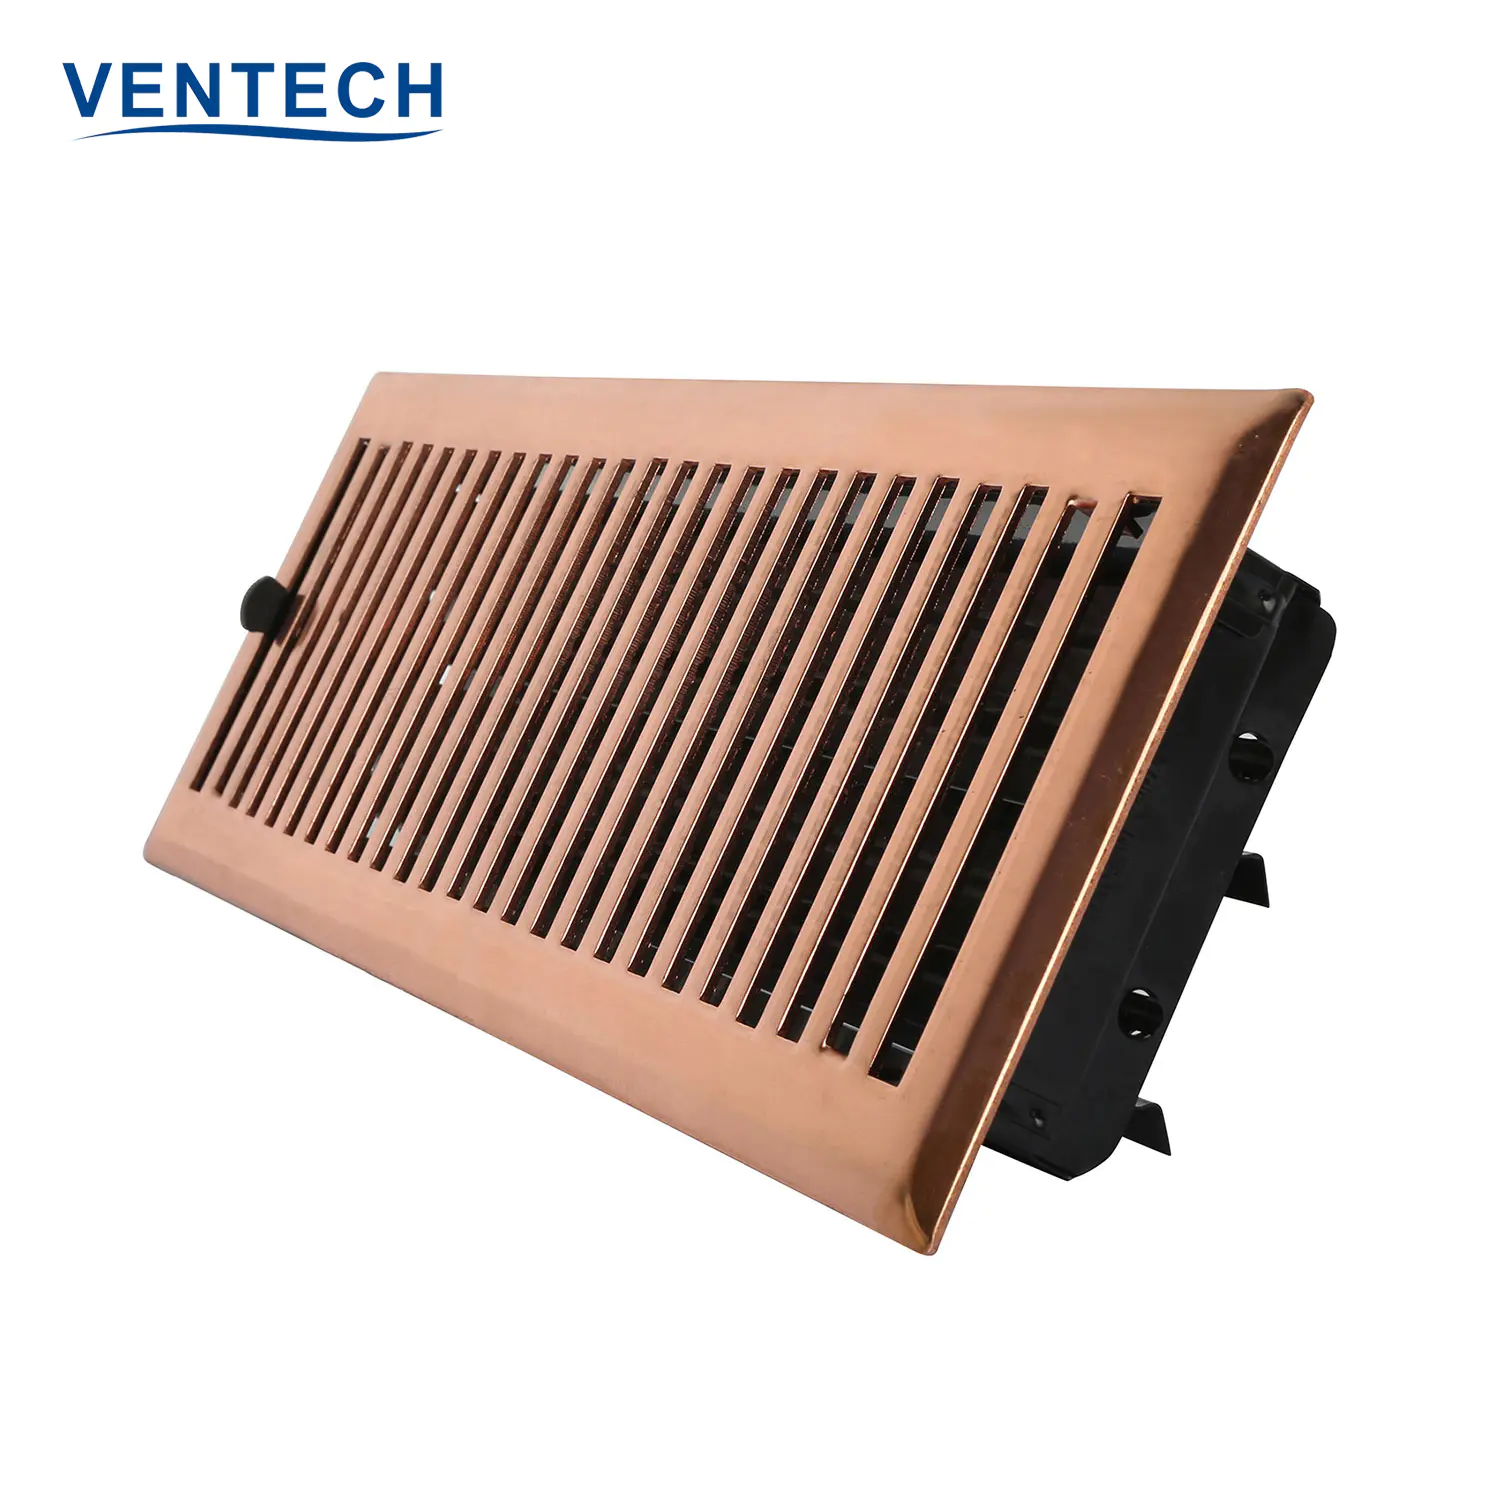 Hvac System Iron Wall Vent Exhaust Air Conditioner Floor Grilles